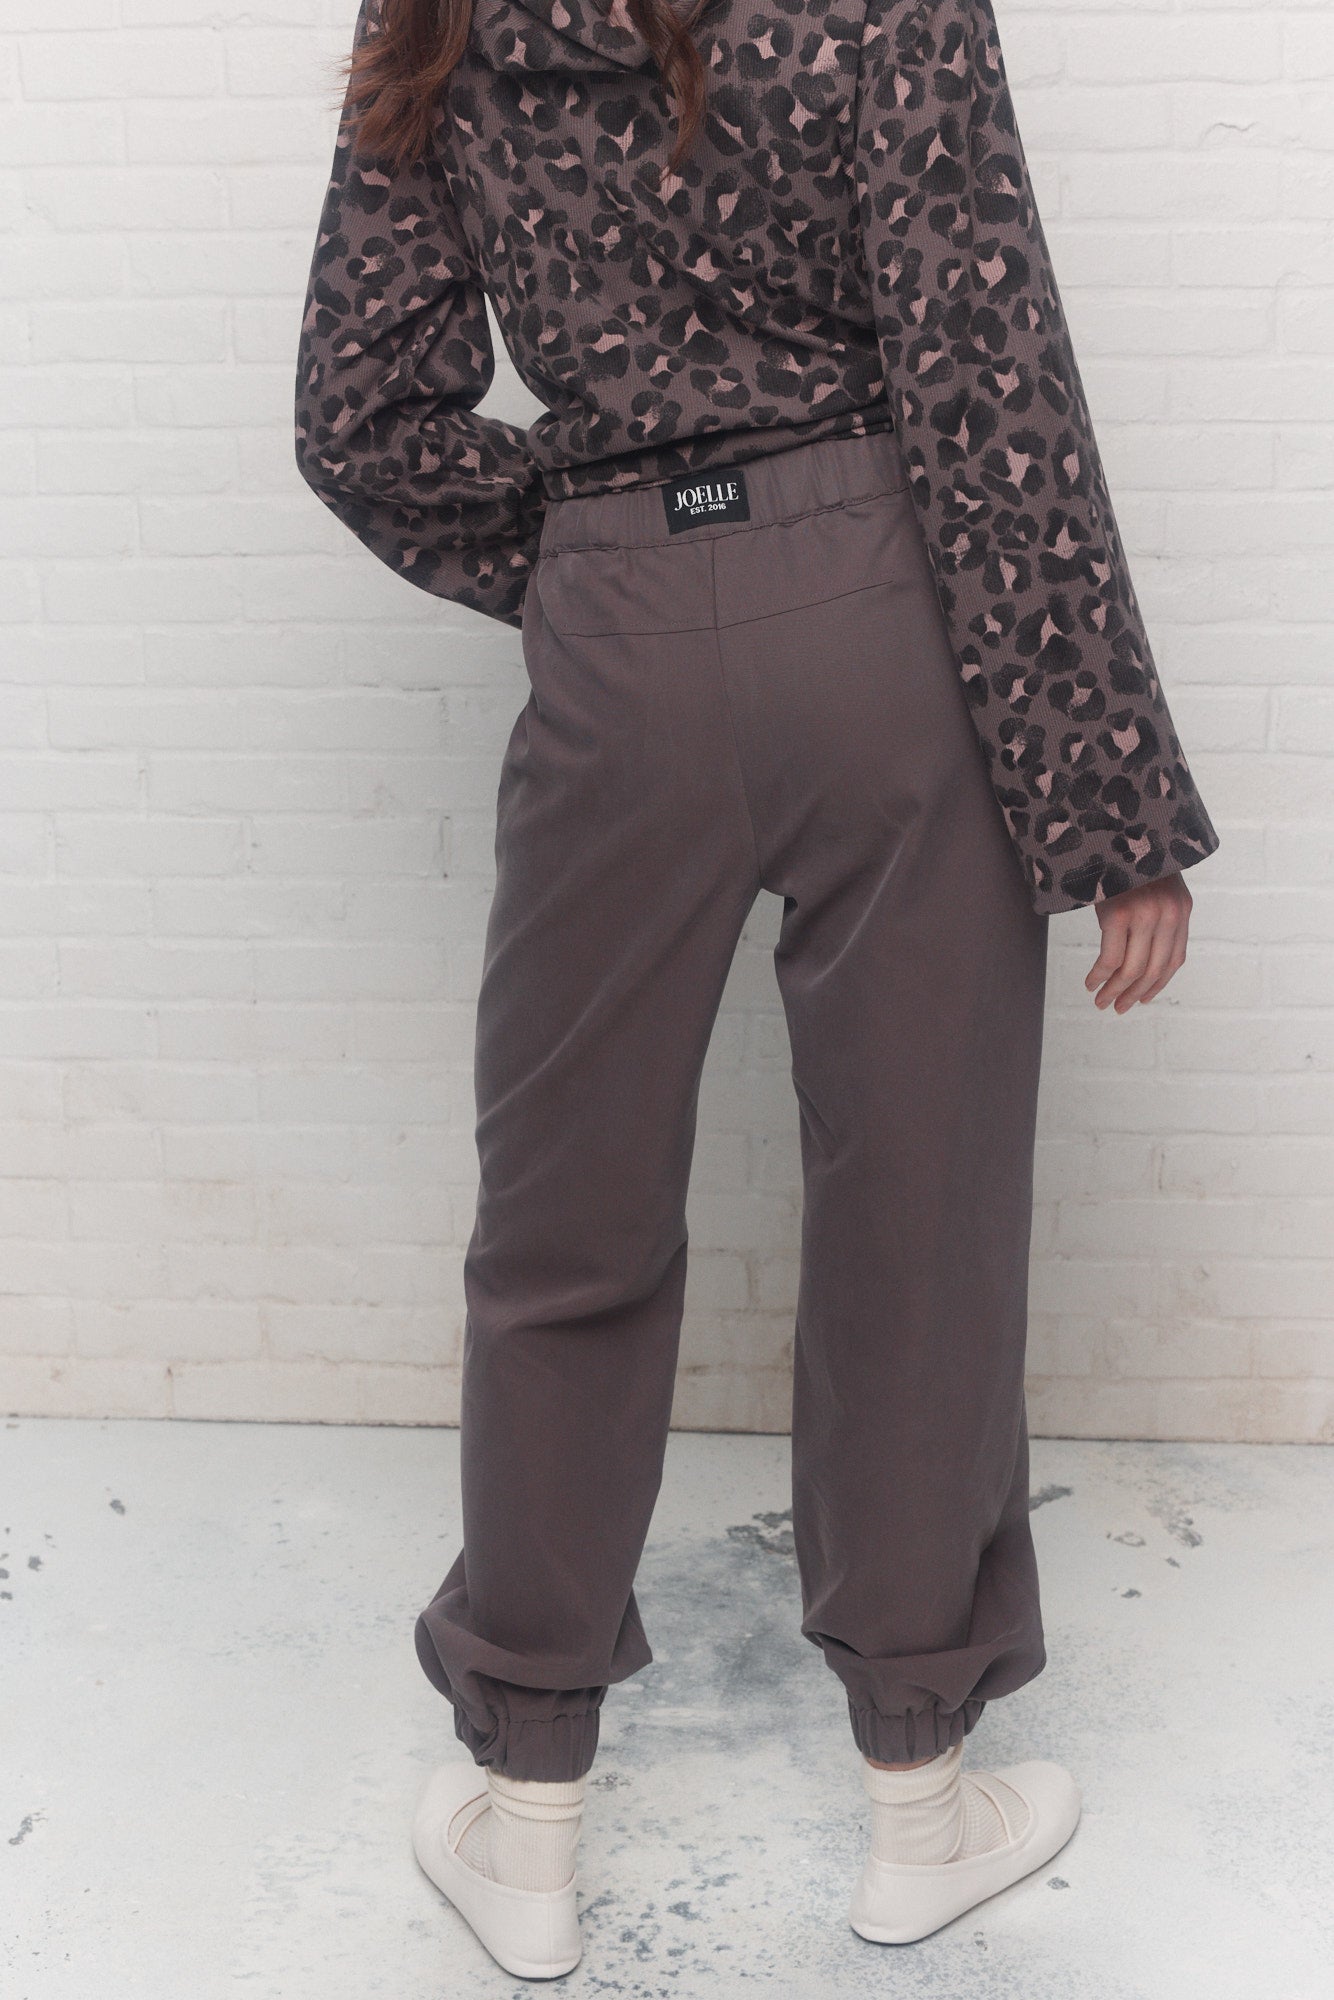 Mauve-taupe pants fitted at the ankles | Davila